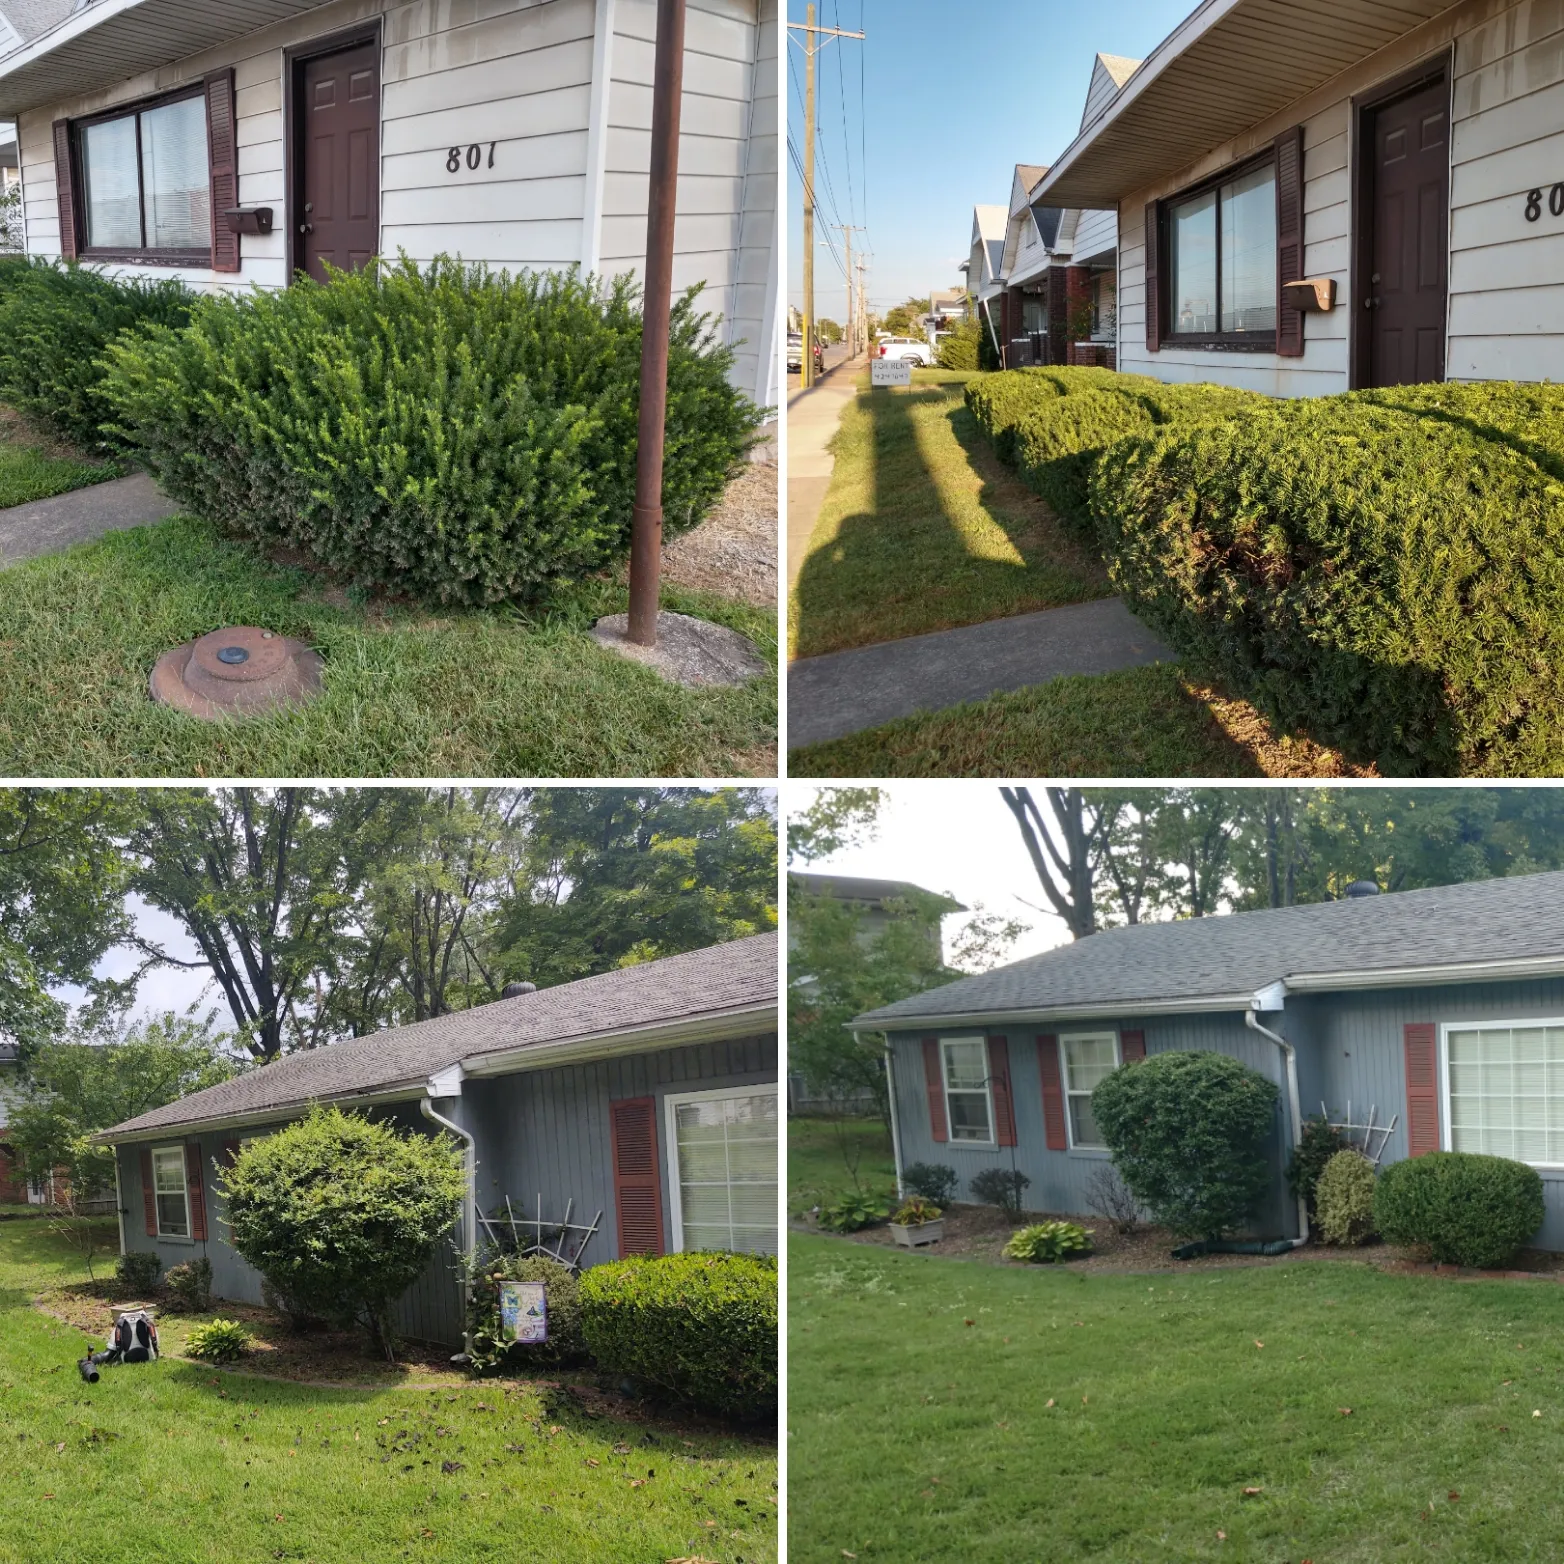 Pruning Bushes and Perennial Service for The Grass Guys Complete Lawn Care LLC. in Evansville, IN